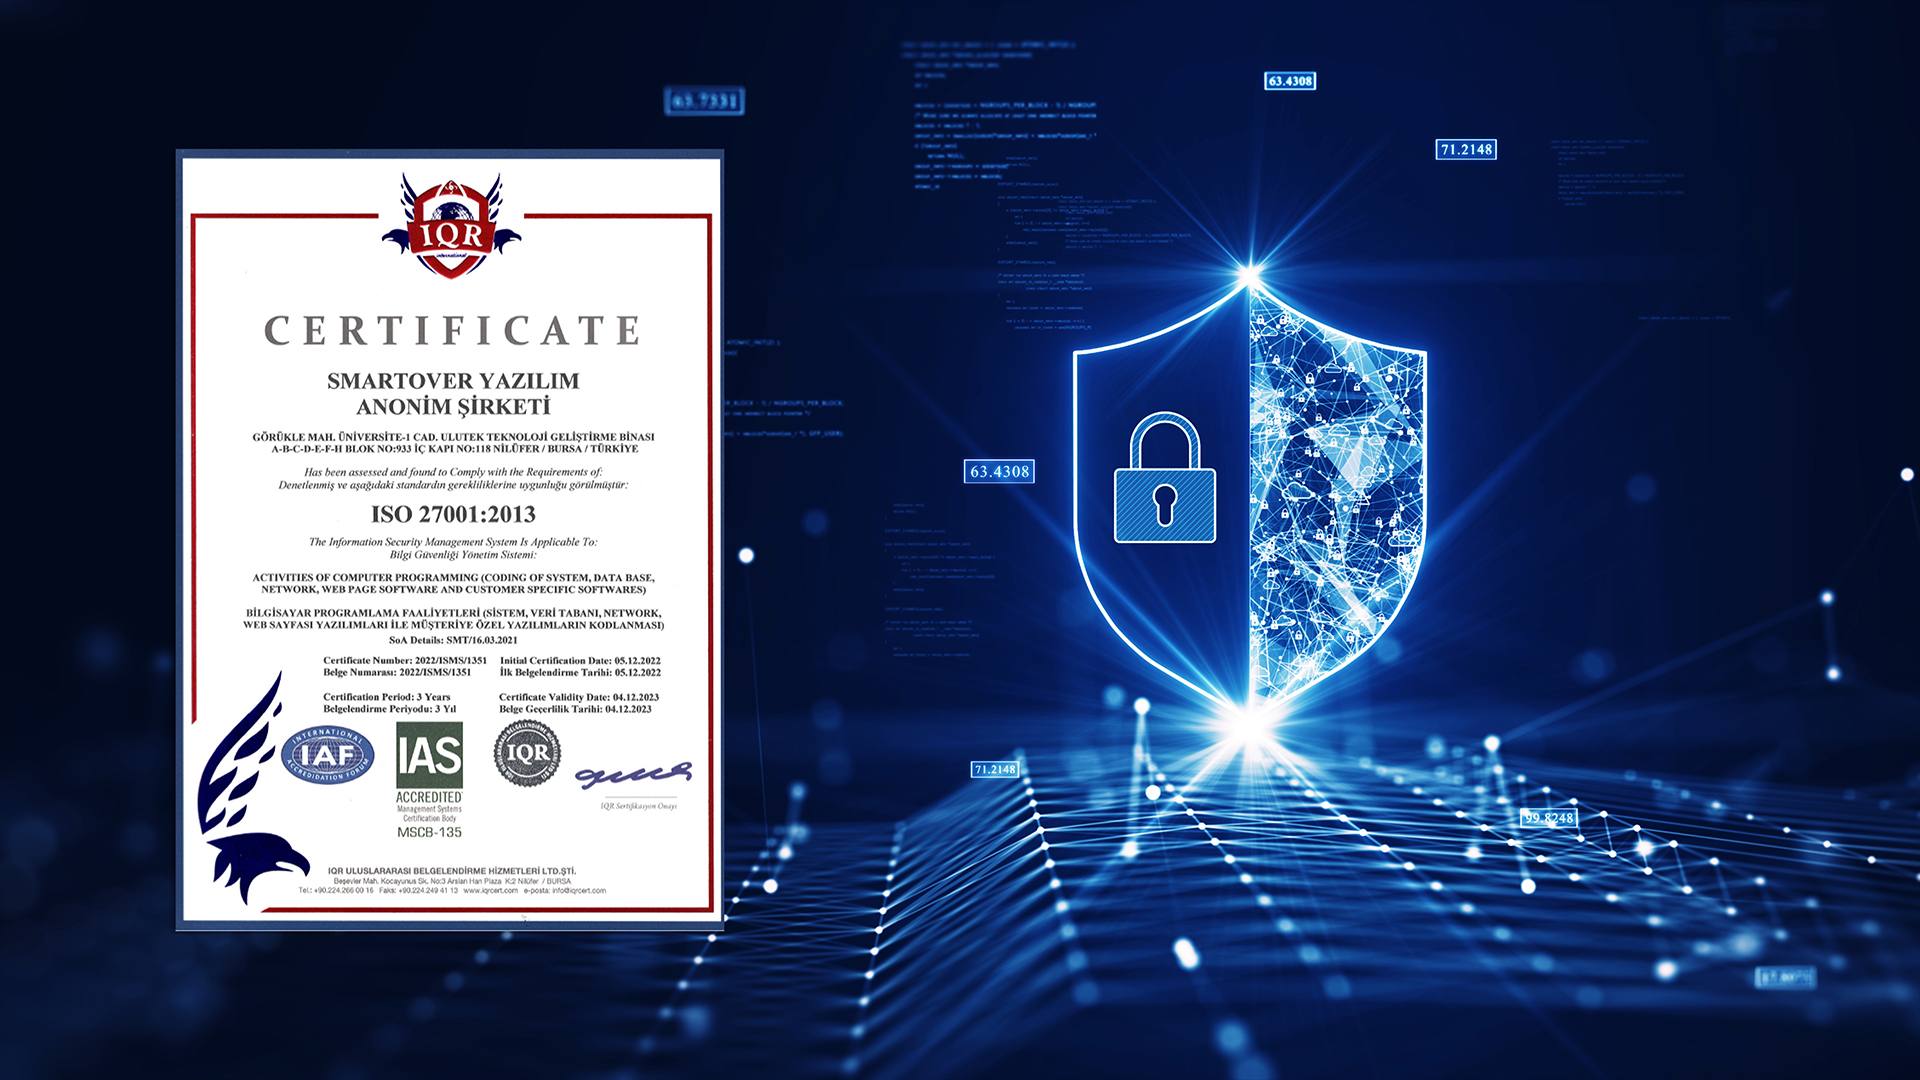 TROWAS Documented its Data Protection and Information Security System with ISO 27001:2013 certificate.